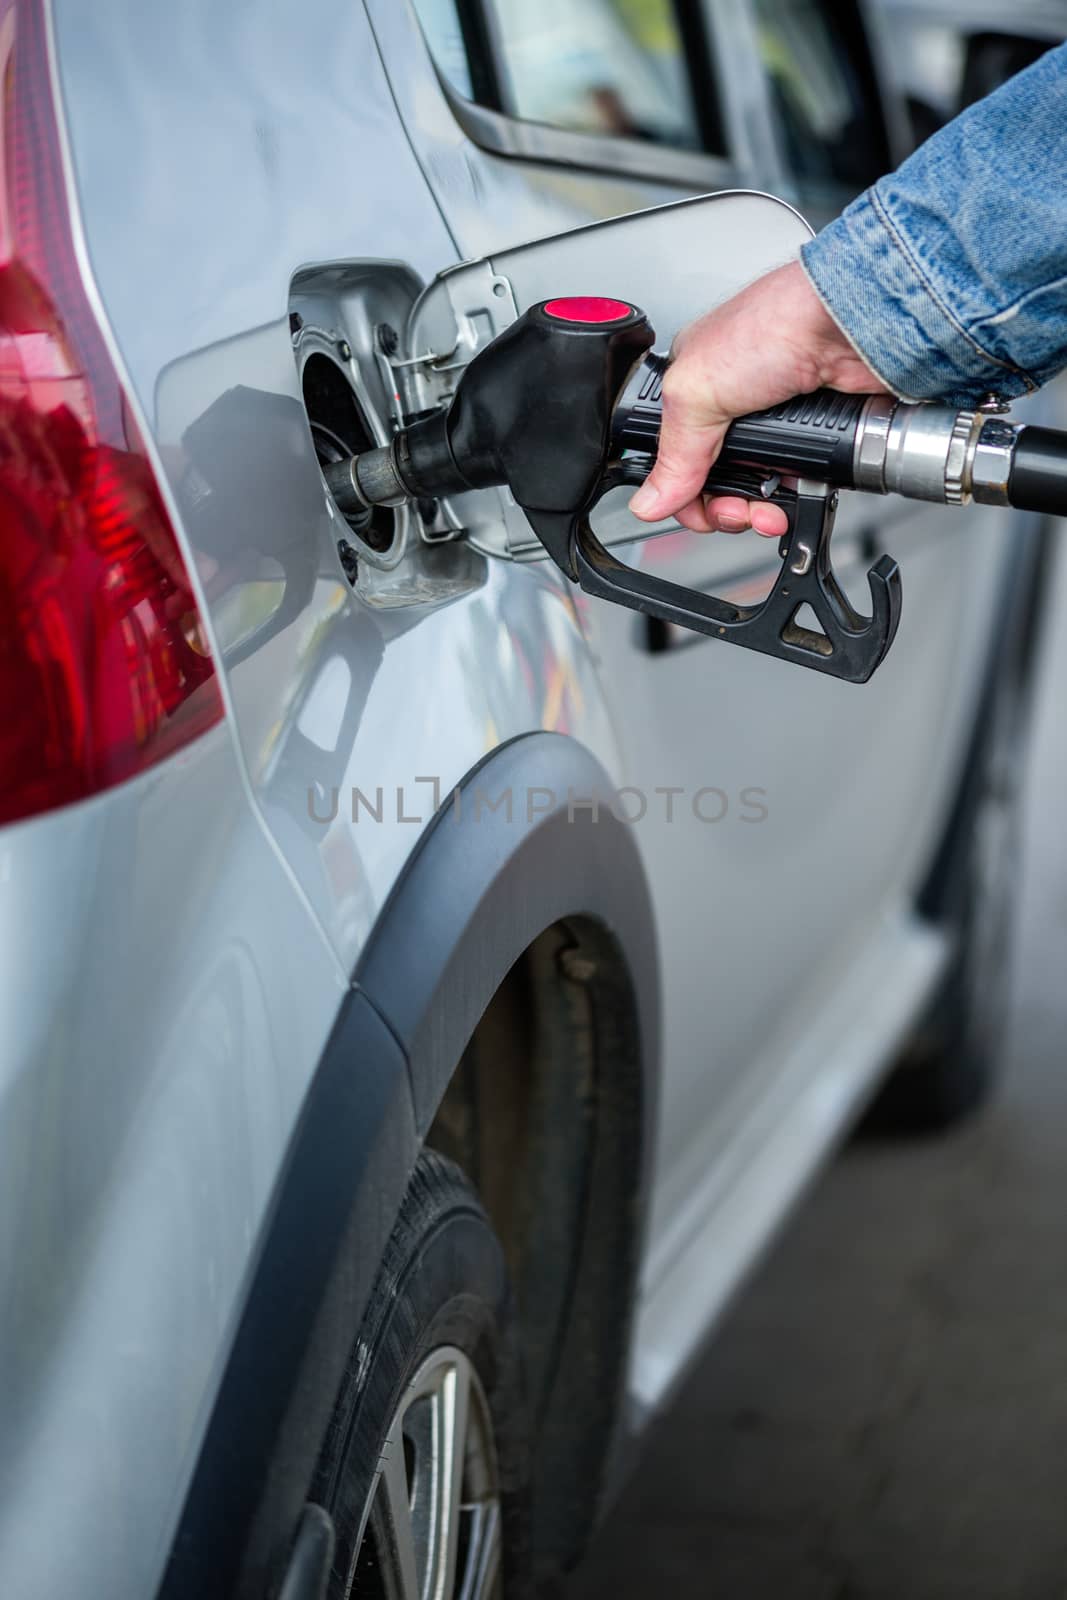 hand in jeans jacket refueling gray metallic car on gas station - closeup with selective focus - vertical composition by z1b